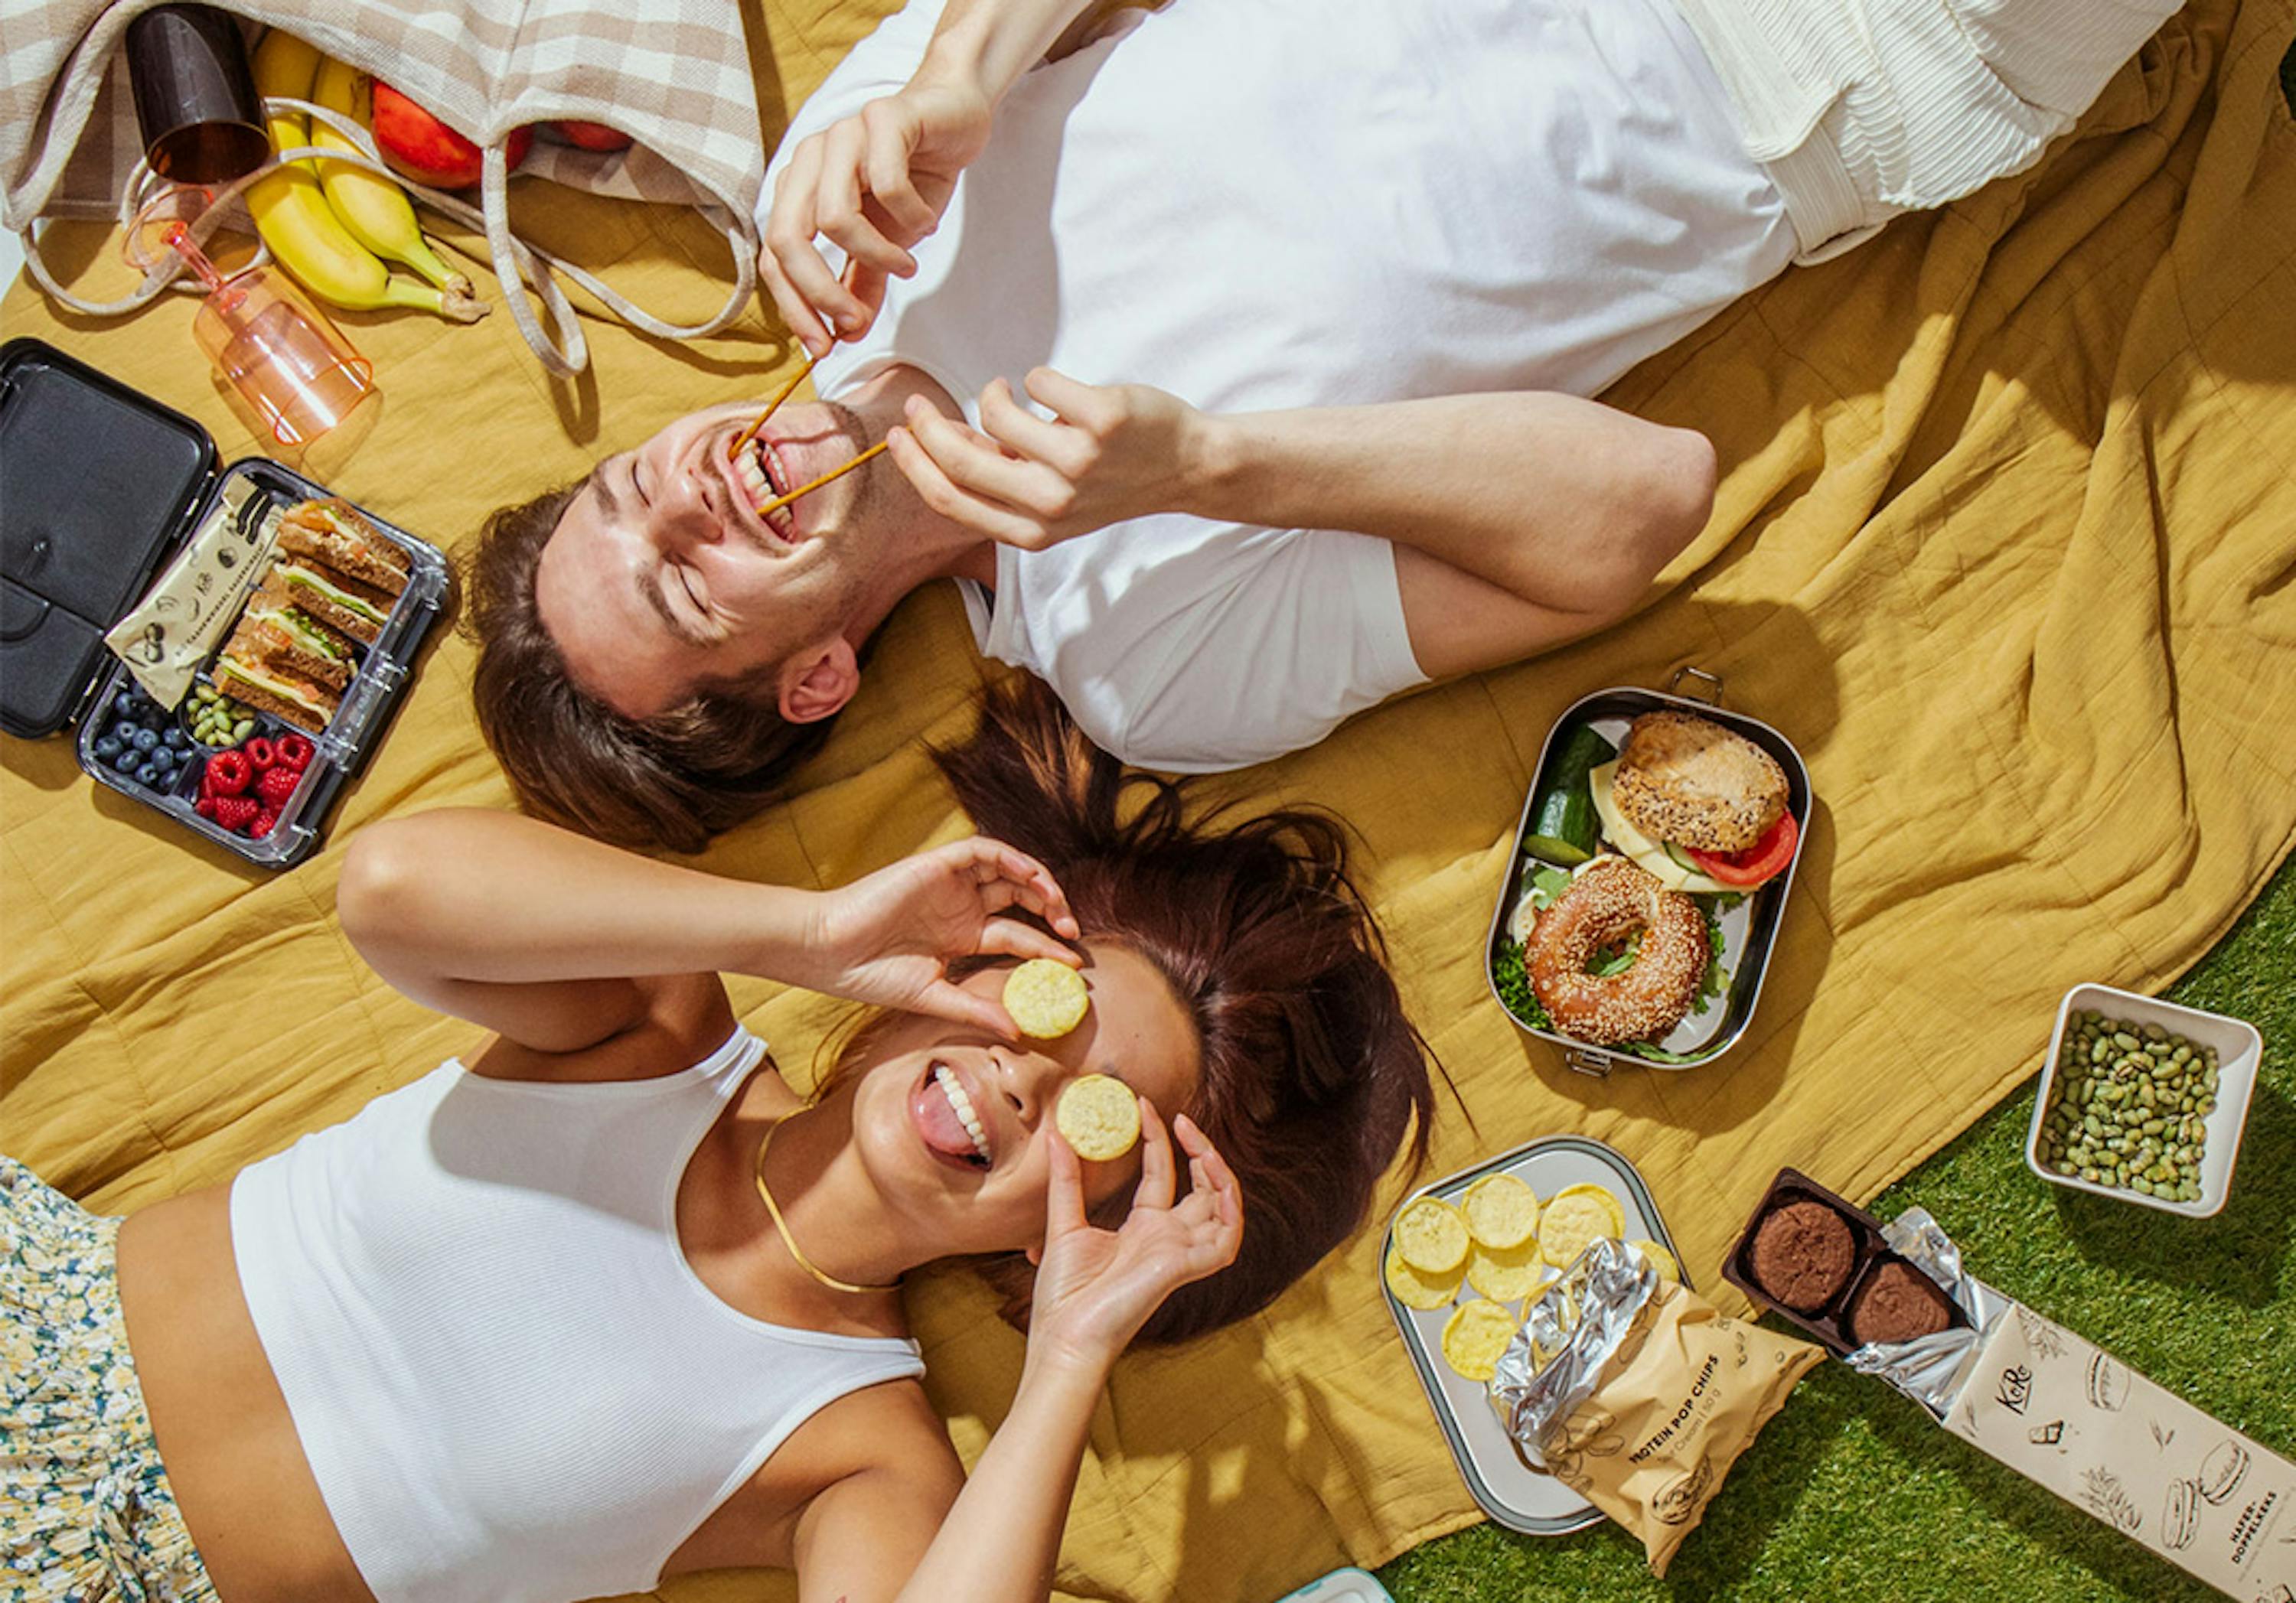 Covered with snacks: ideas for your picnic